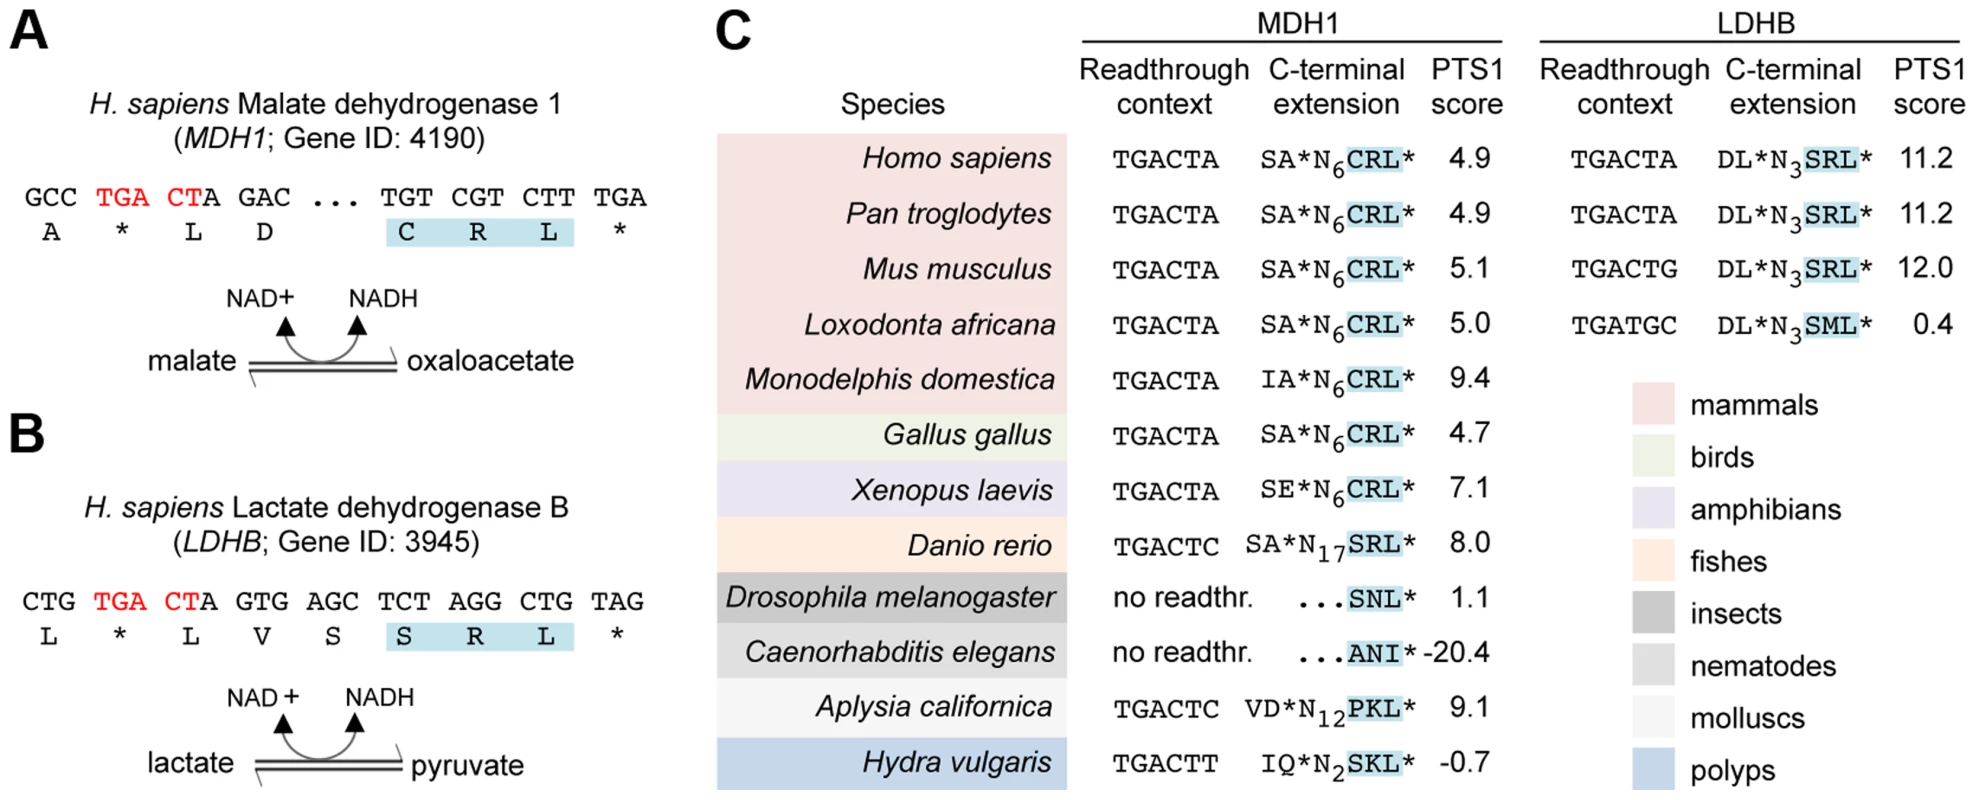 Translational readthrough derived PTS1 motifs of MDH1 and LDHB are conserved in animals.